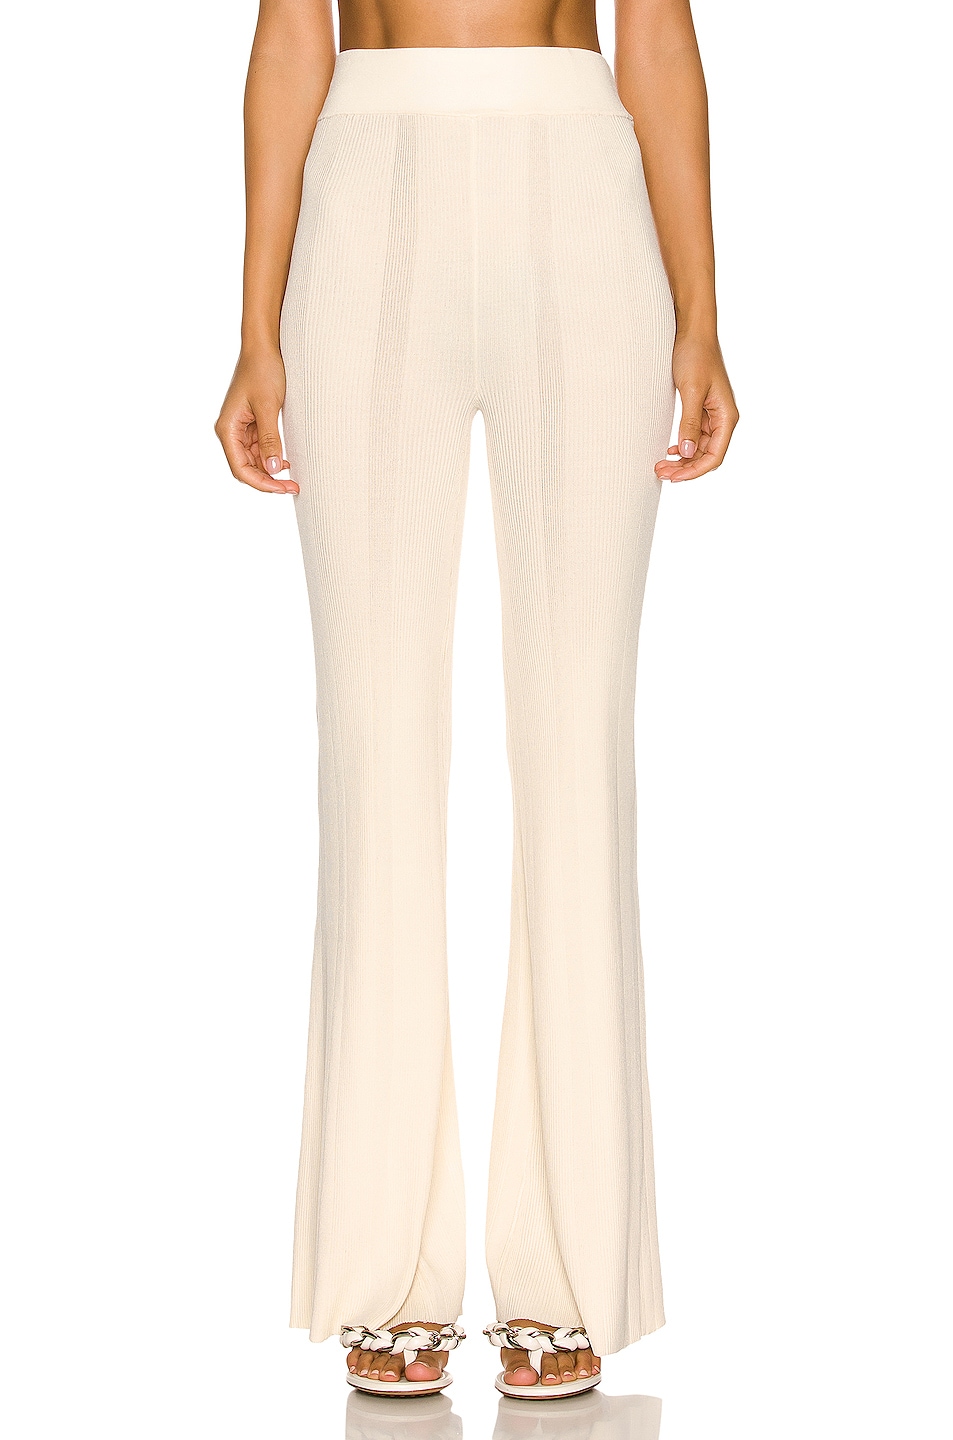 Image 1 of REMAIN Solaima Knit Pant in White Asparagus